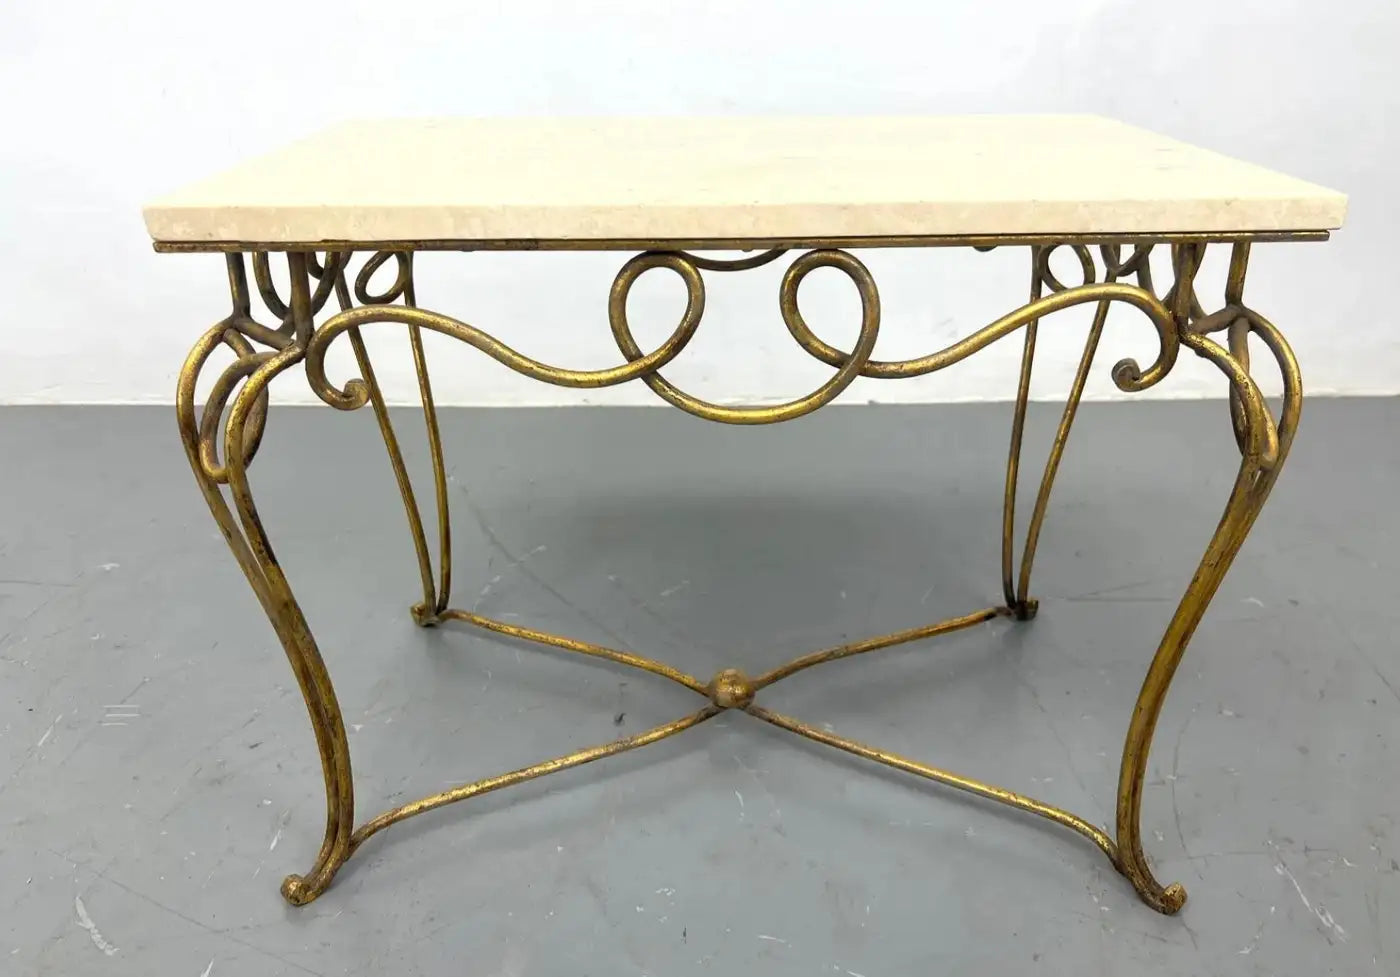 Midcentury French Rene Prou Art Deco Gilded Iron End Tables with Travertine Tops